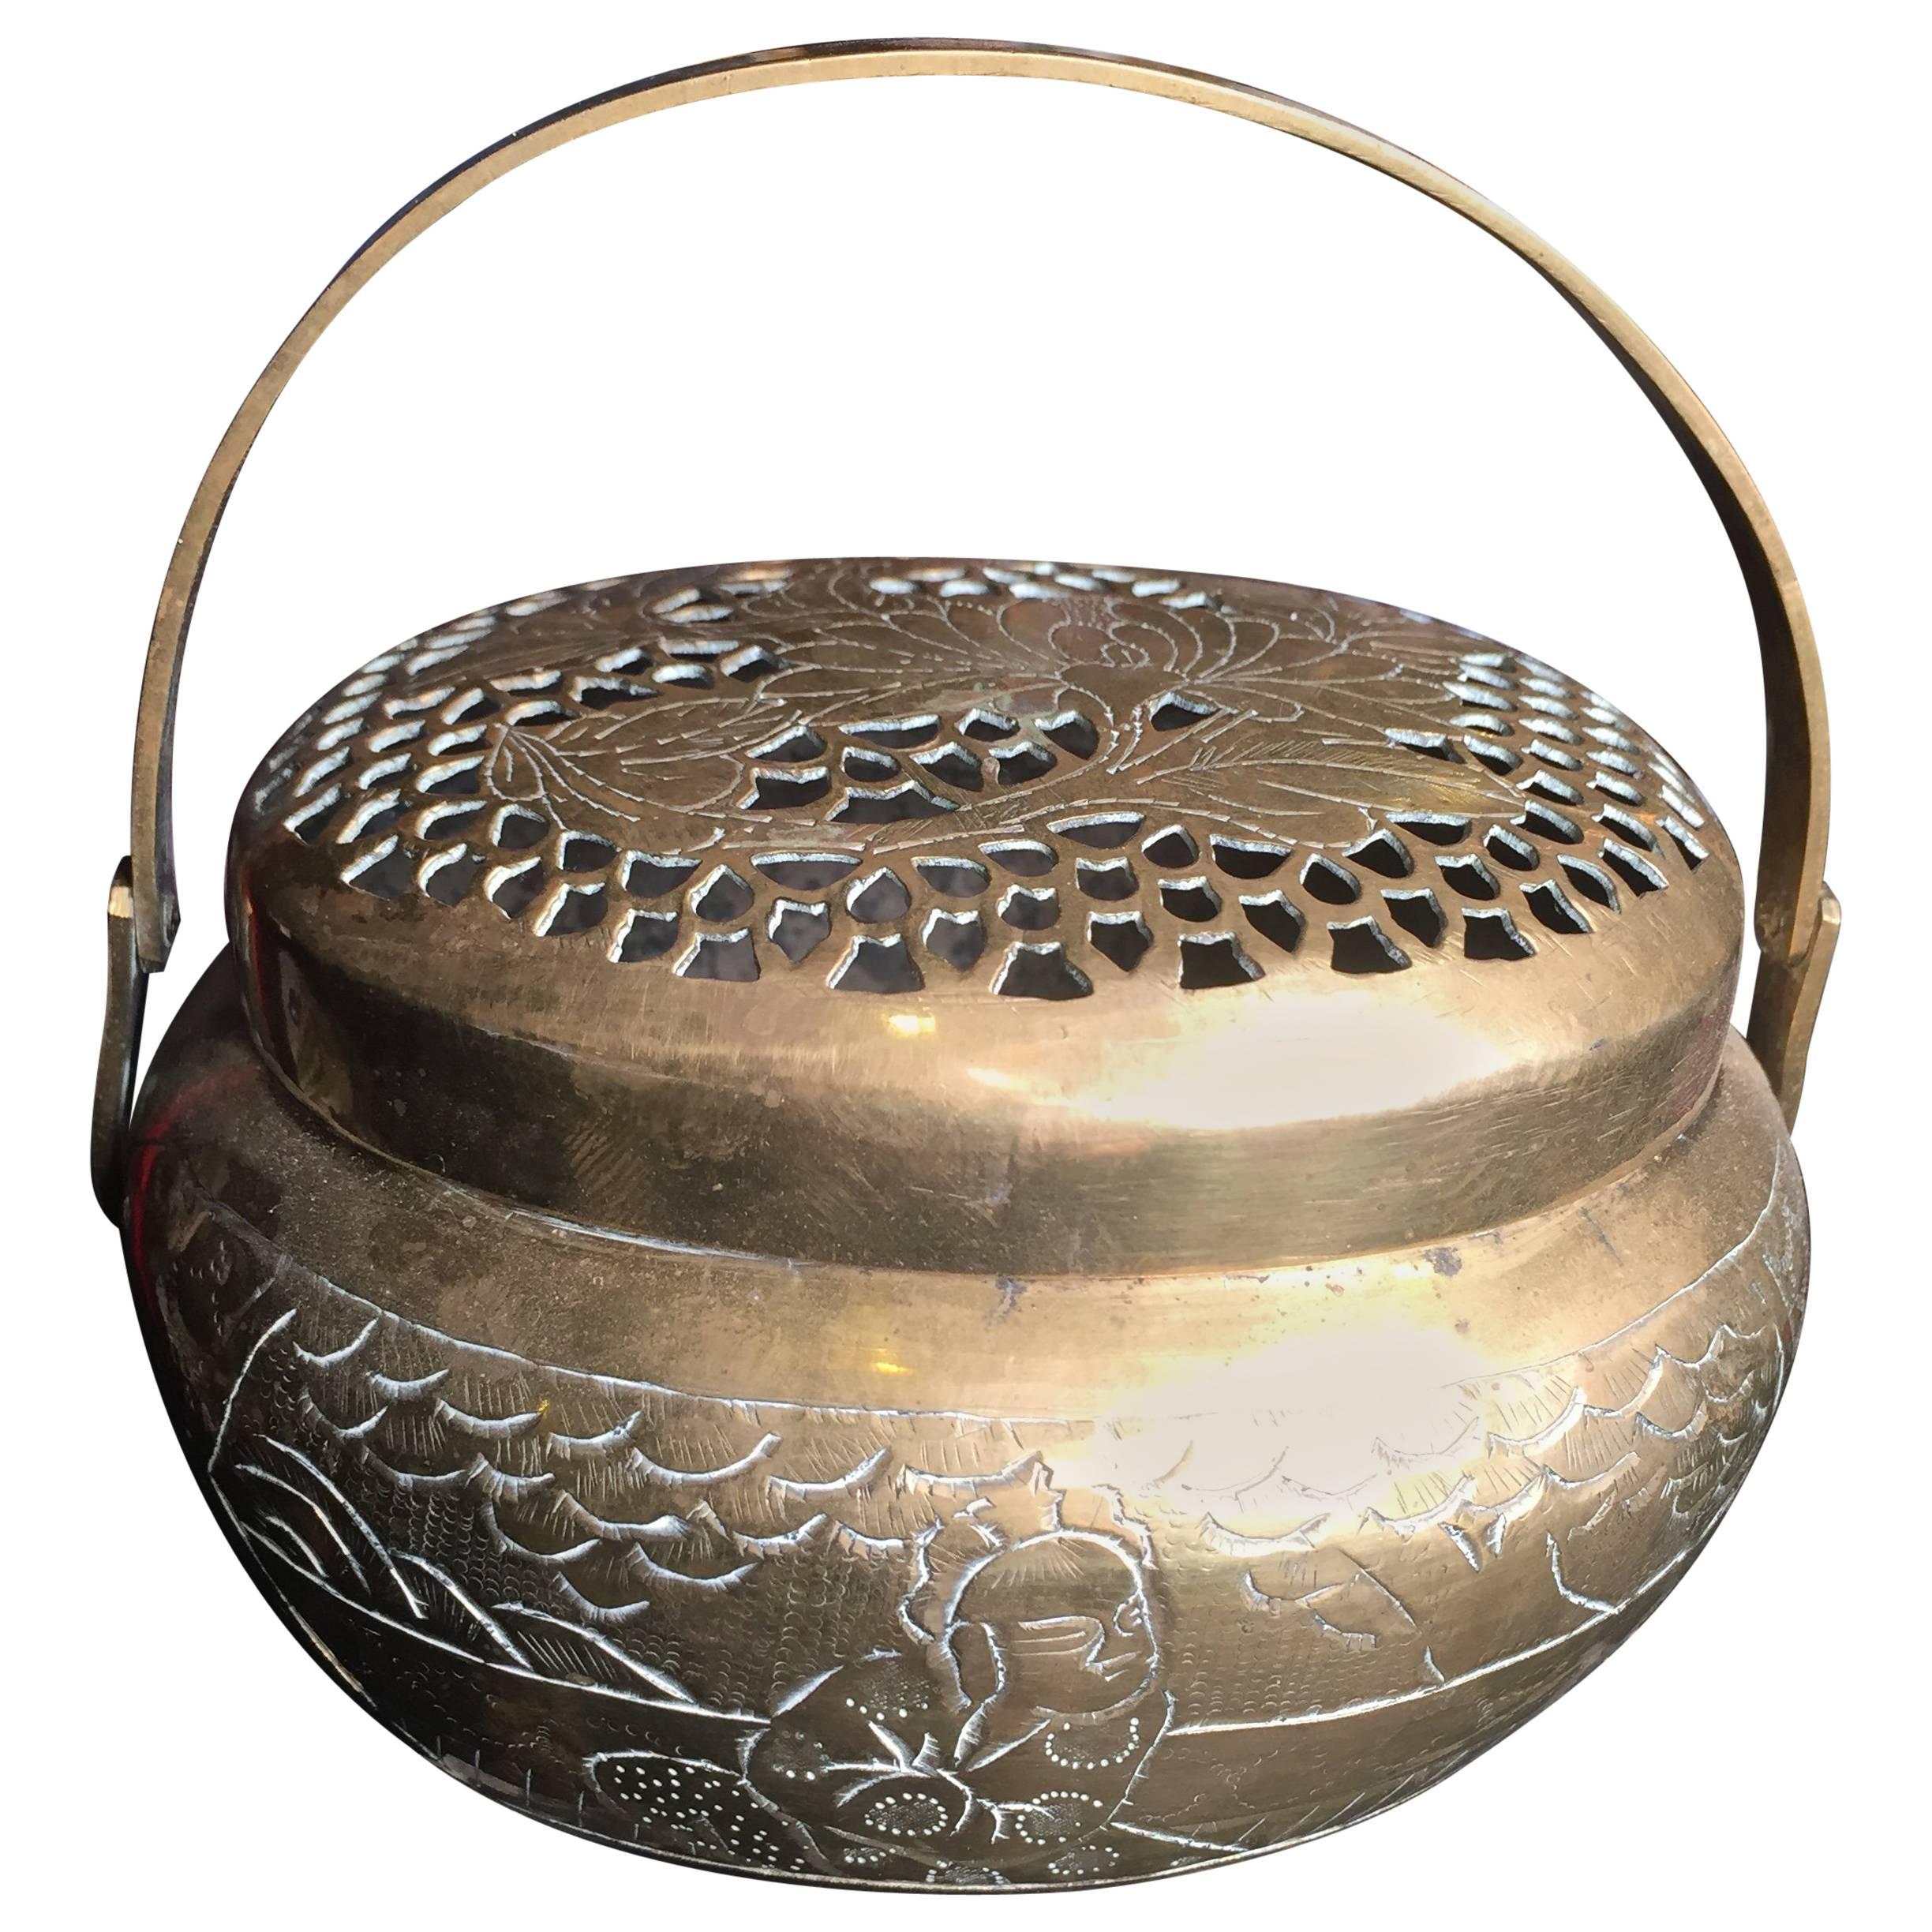 China Antique Metal Hand Warmer and Incense Burner, 100 Years Old